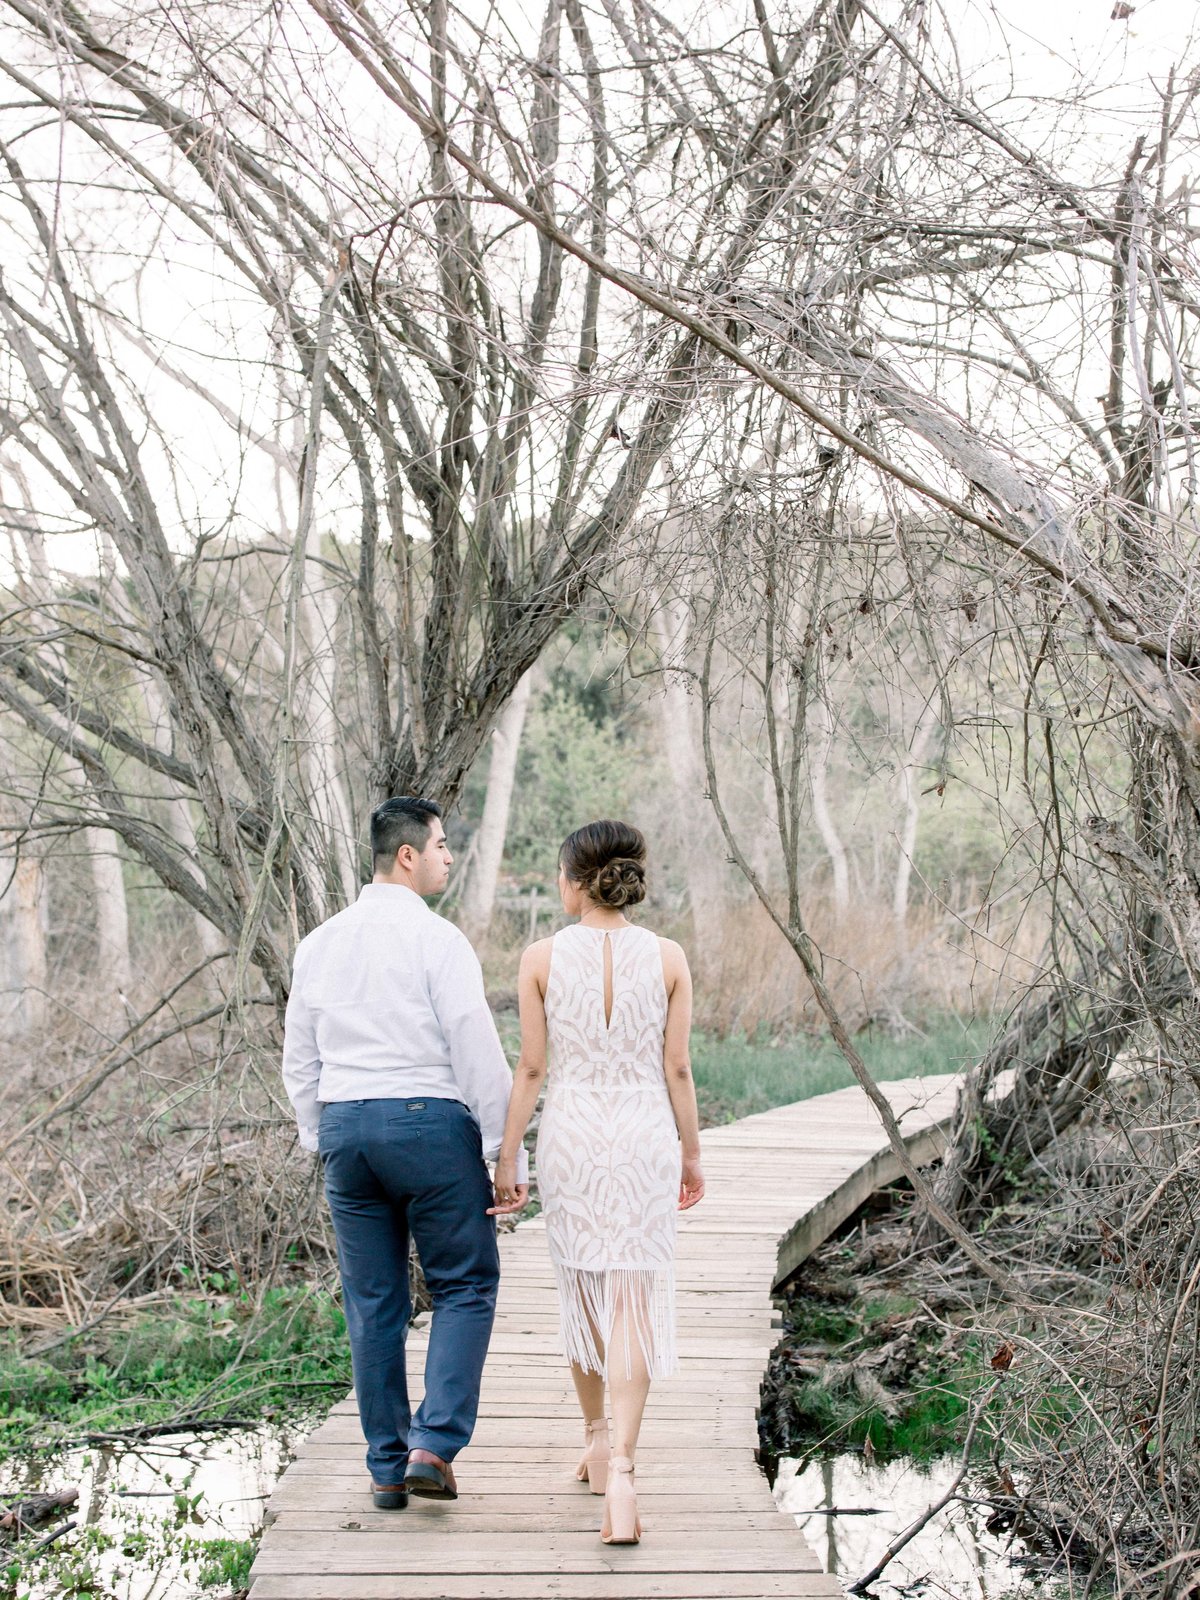 Babsie-Ly-Photography-Film-Engagement-at-the-park-nature-Orange-County-San-Diego-Stephanie-Tony-004